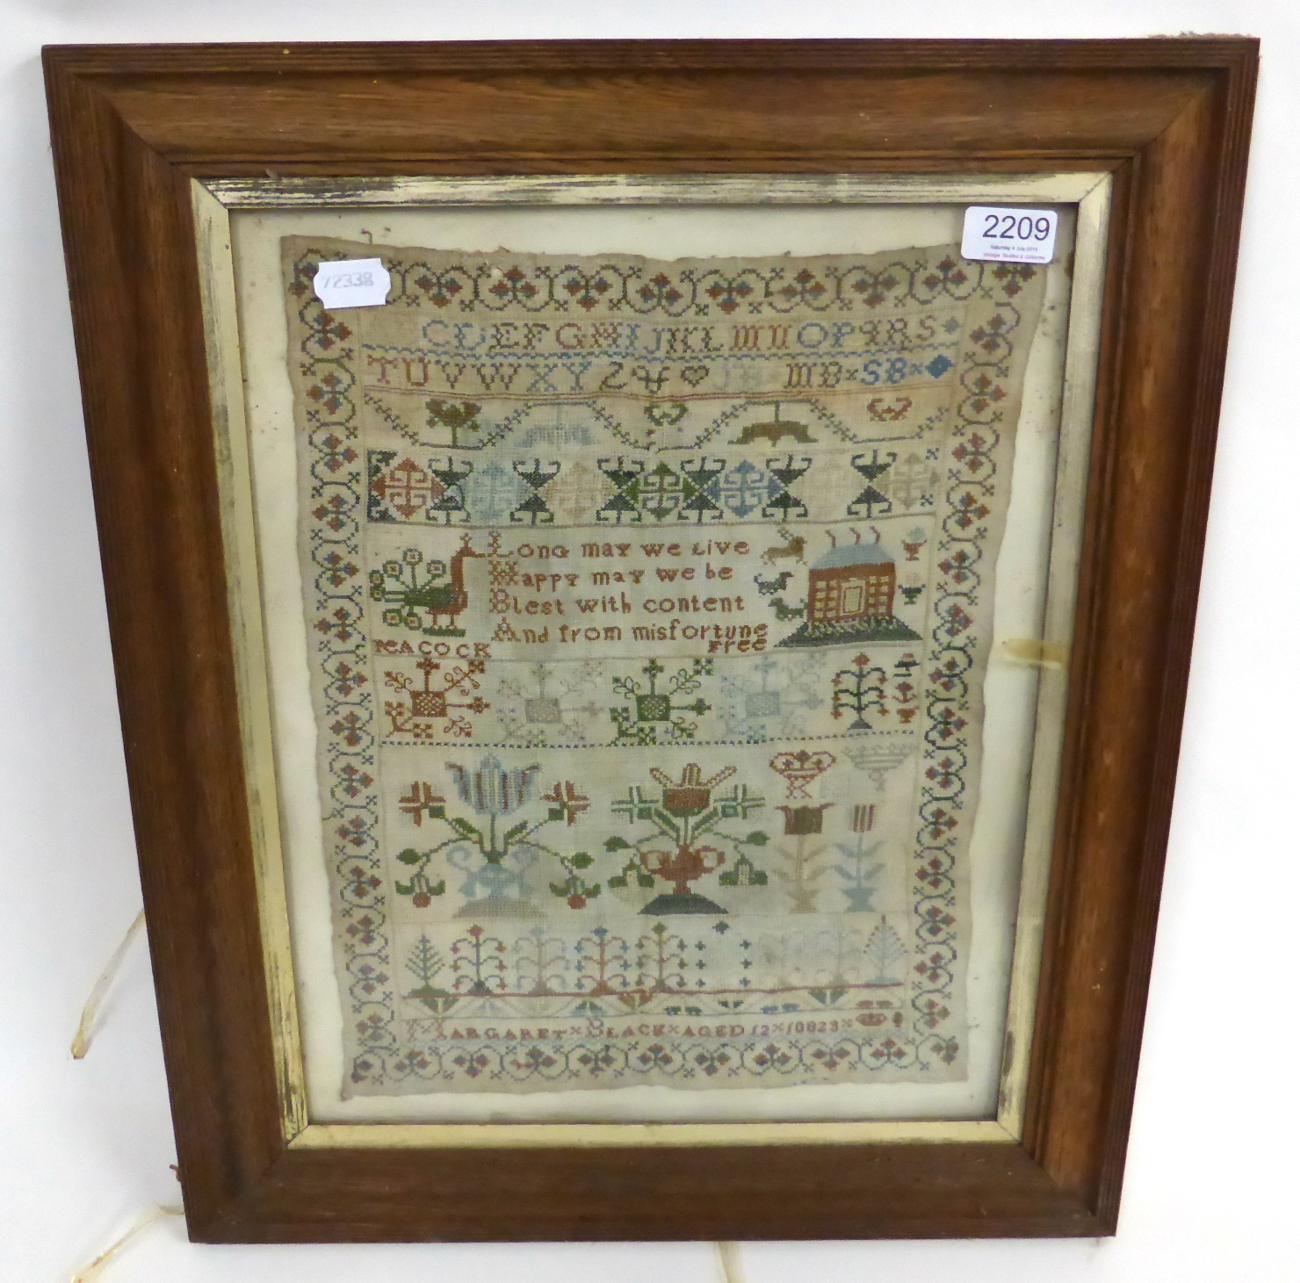 19th Century Alphabet Sampler Worked by Margaret Black aged 12 with central verse, floral motifs,